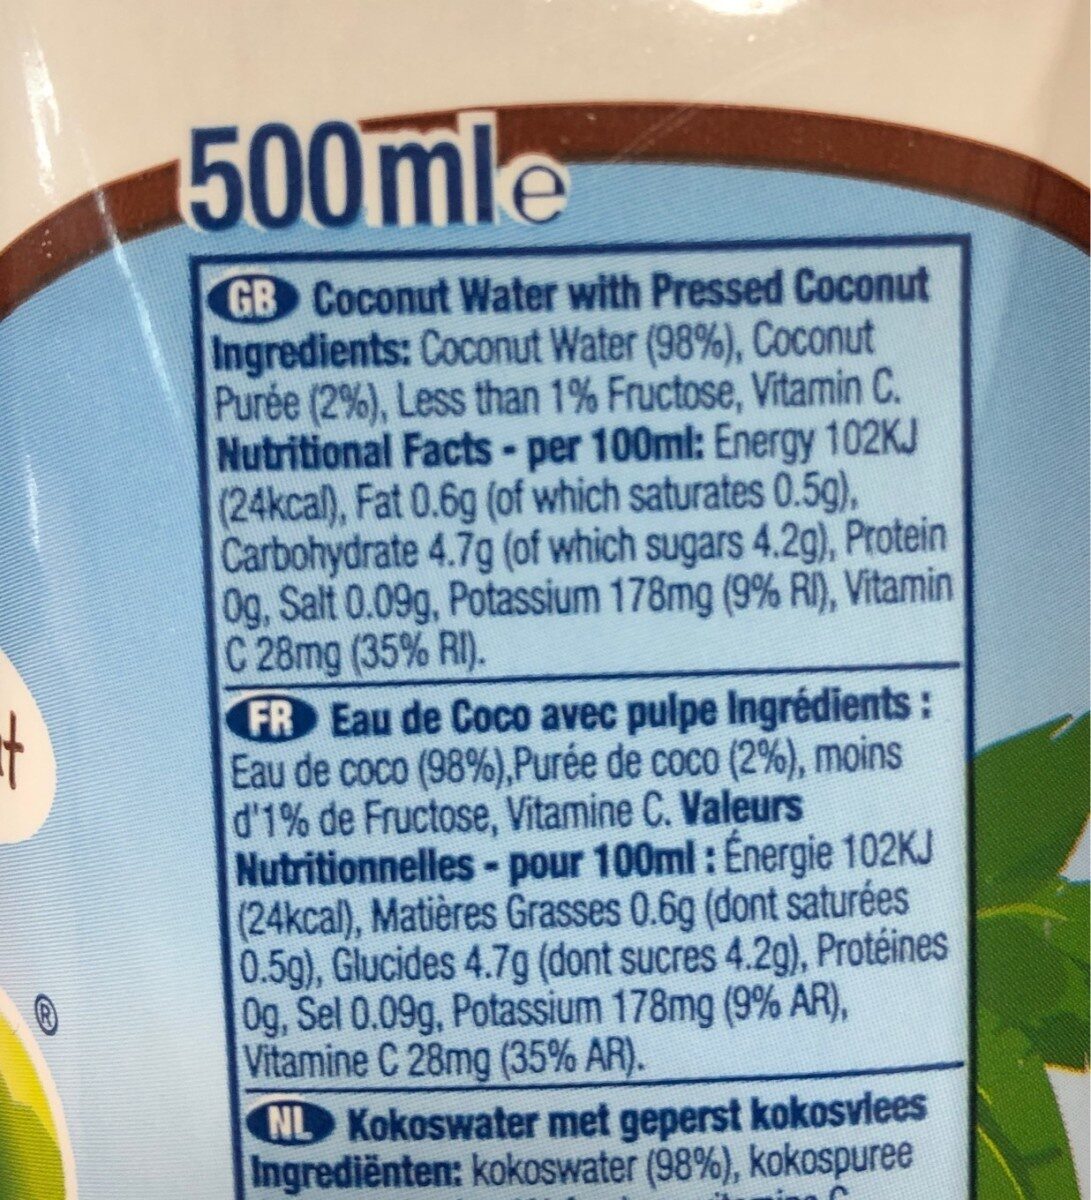 Coconut water with pressed coconut - Nutrition facts - fr